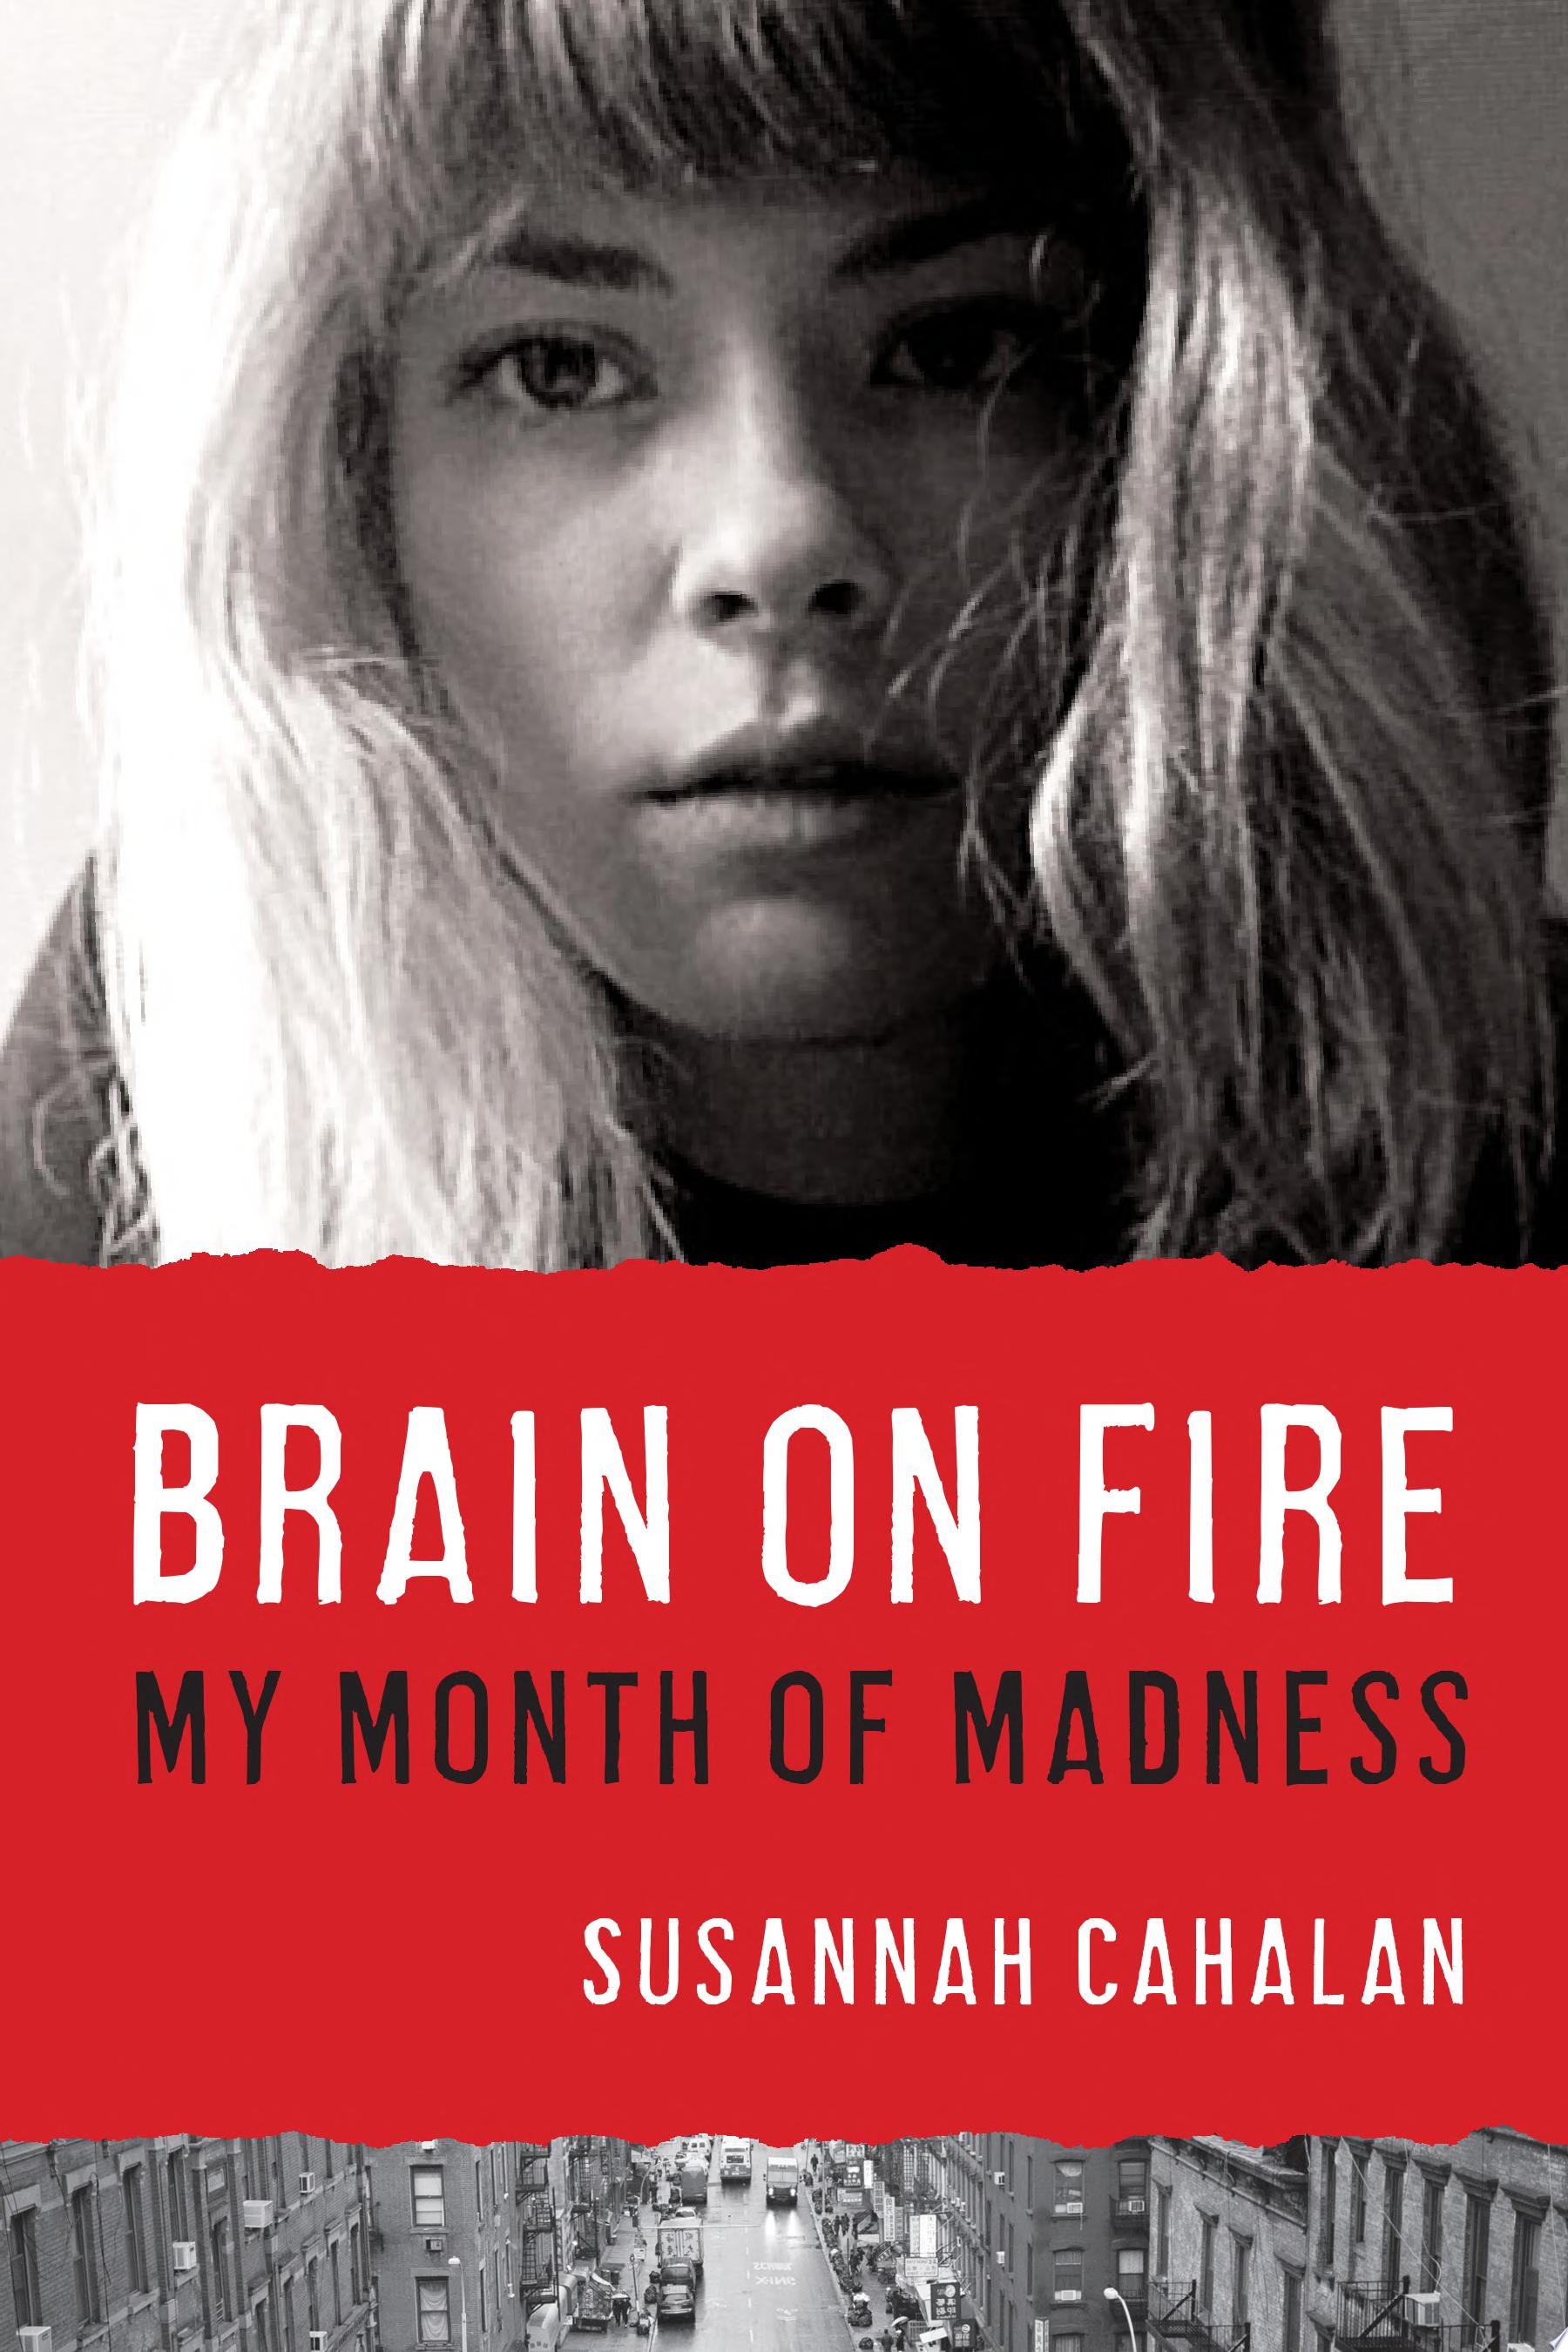 Image for "Brain on Fire"